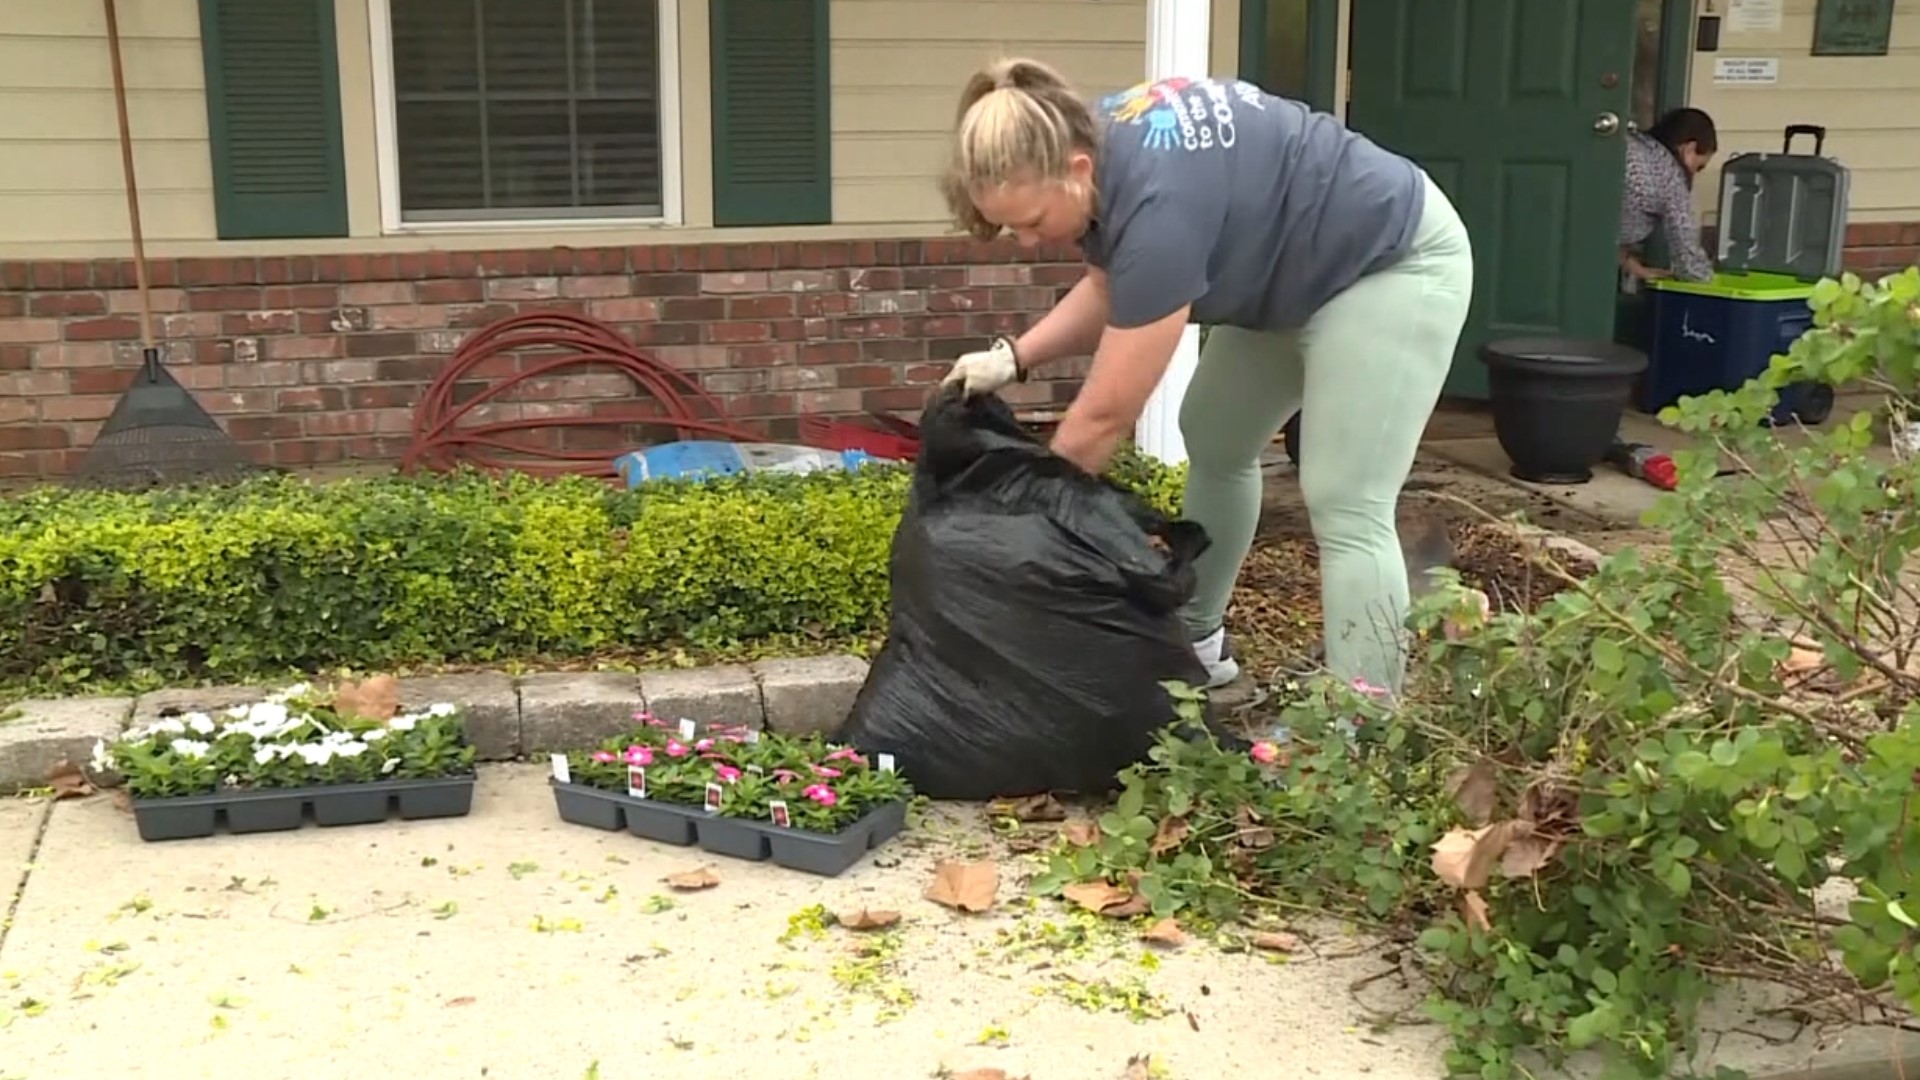 Today is the 31st United Way Day of Caring in Fort Smith. Watch the video to learn more about its impact in the community.